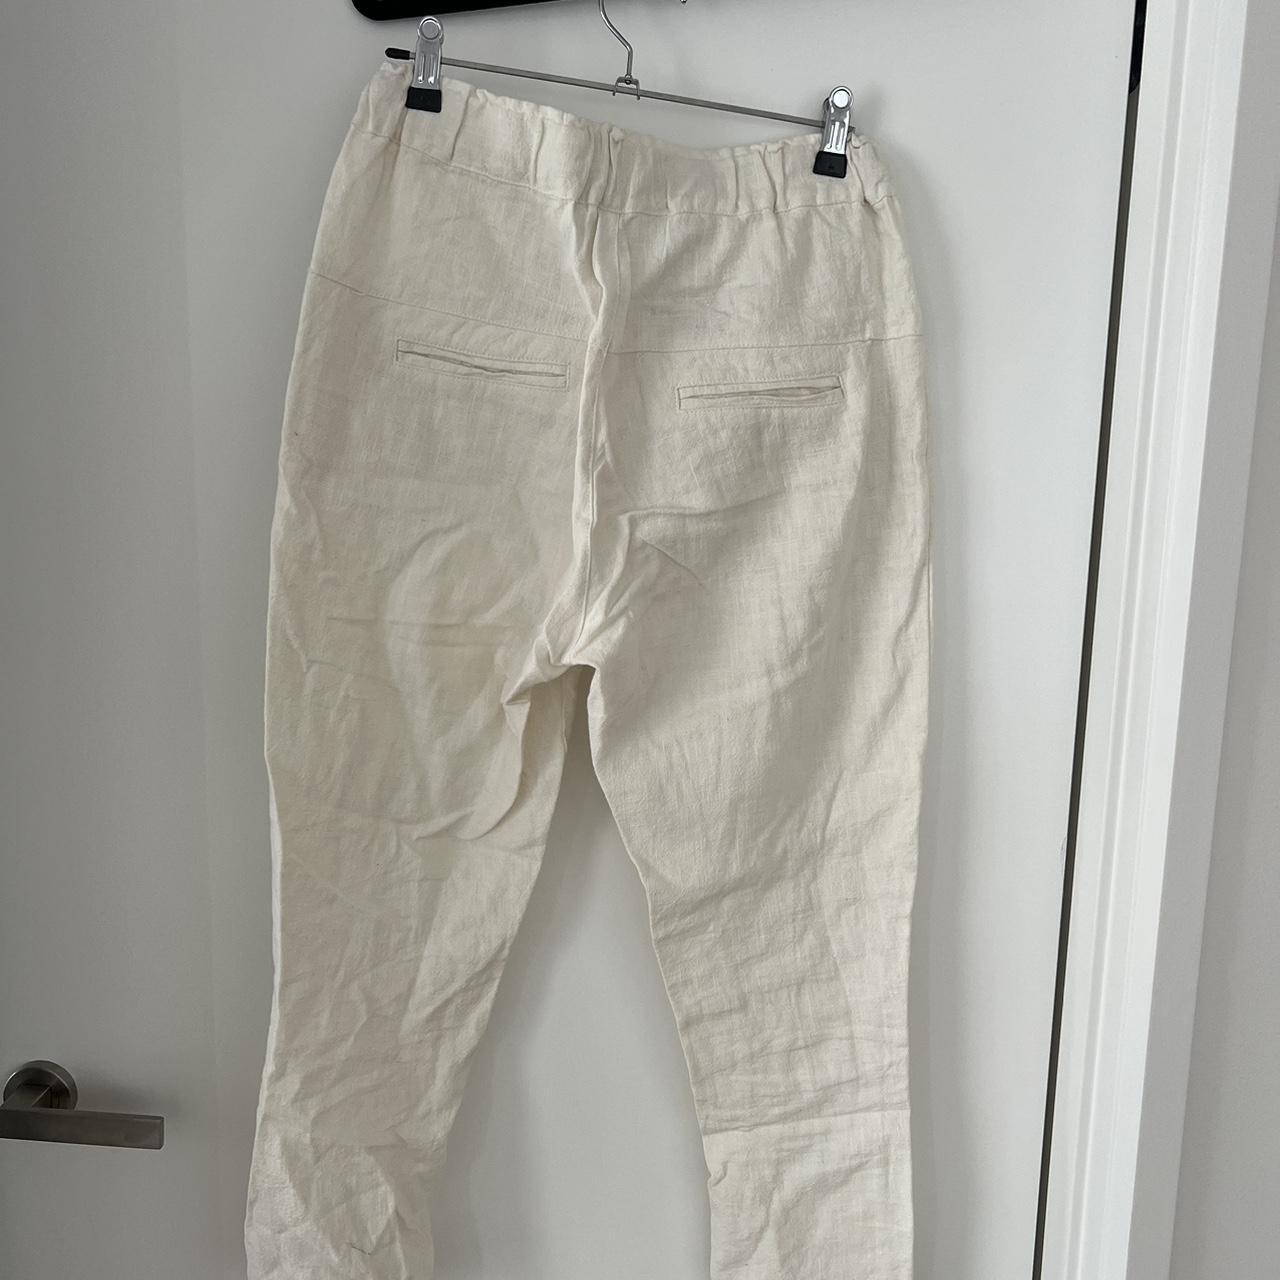 Slightly off white ankle grazing linen pants with a... - Depop